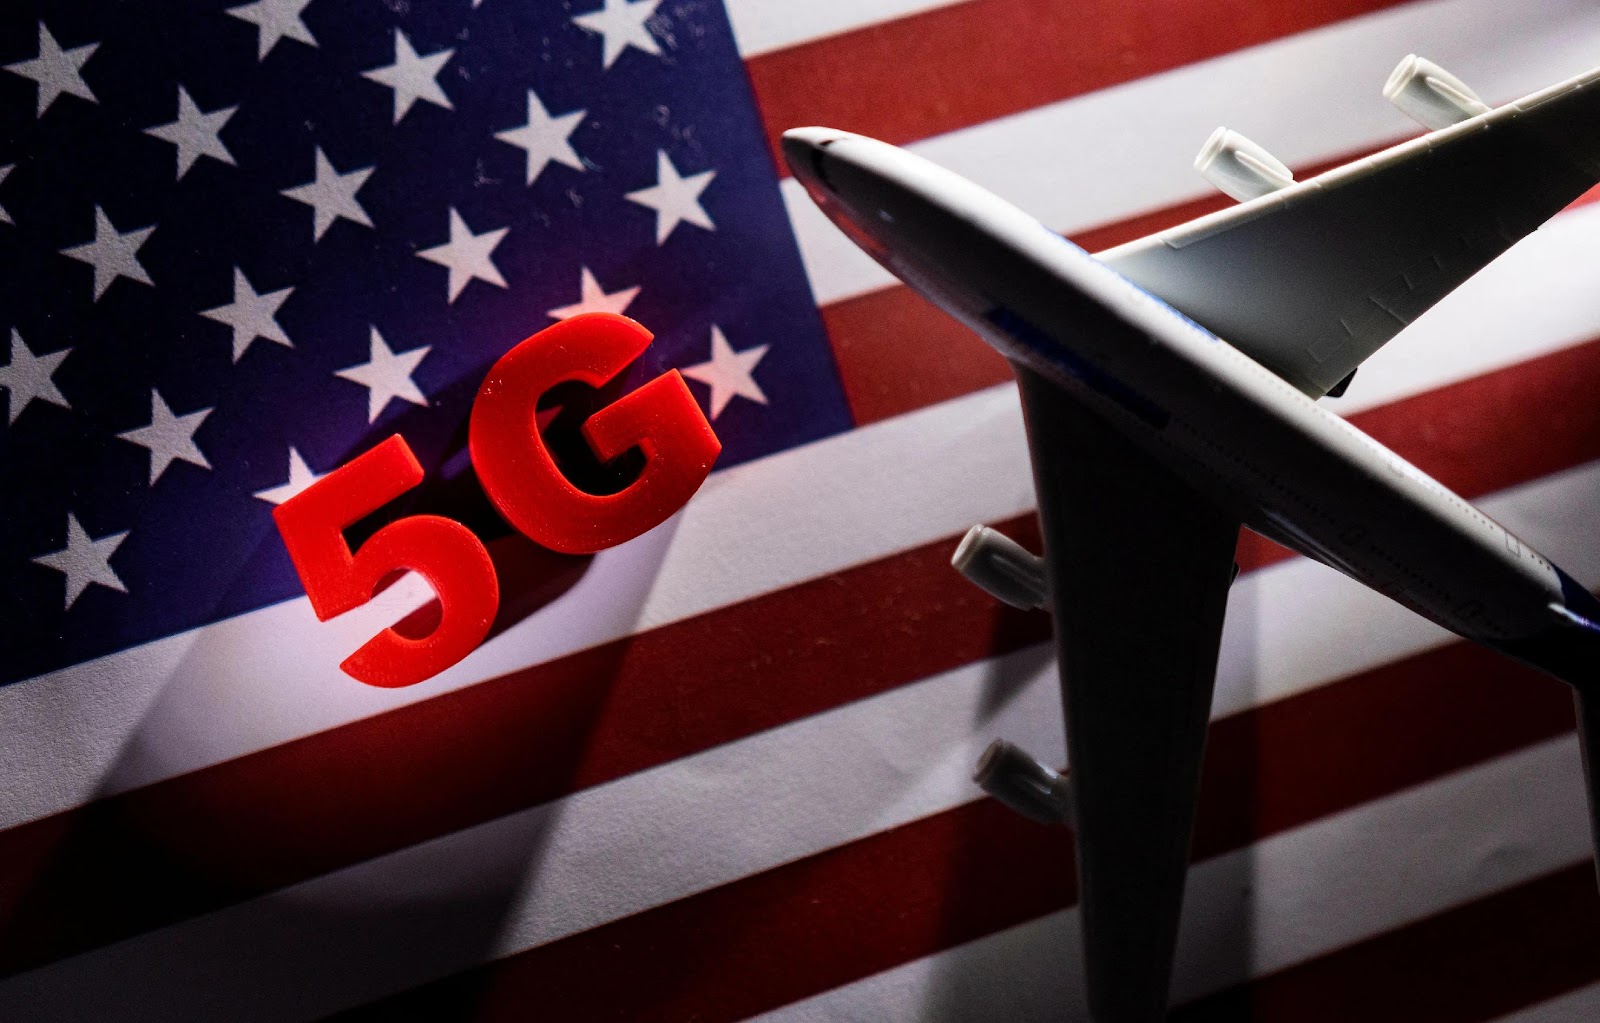 5G words and an airplane toy are placed on a printed U.S. flag in this illustration taken January 18, 2022. REUTERS/Dado Ruvic/Illustration